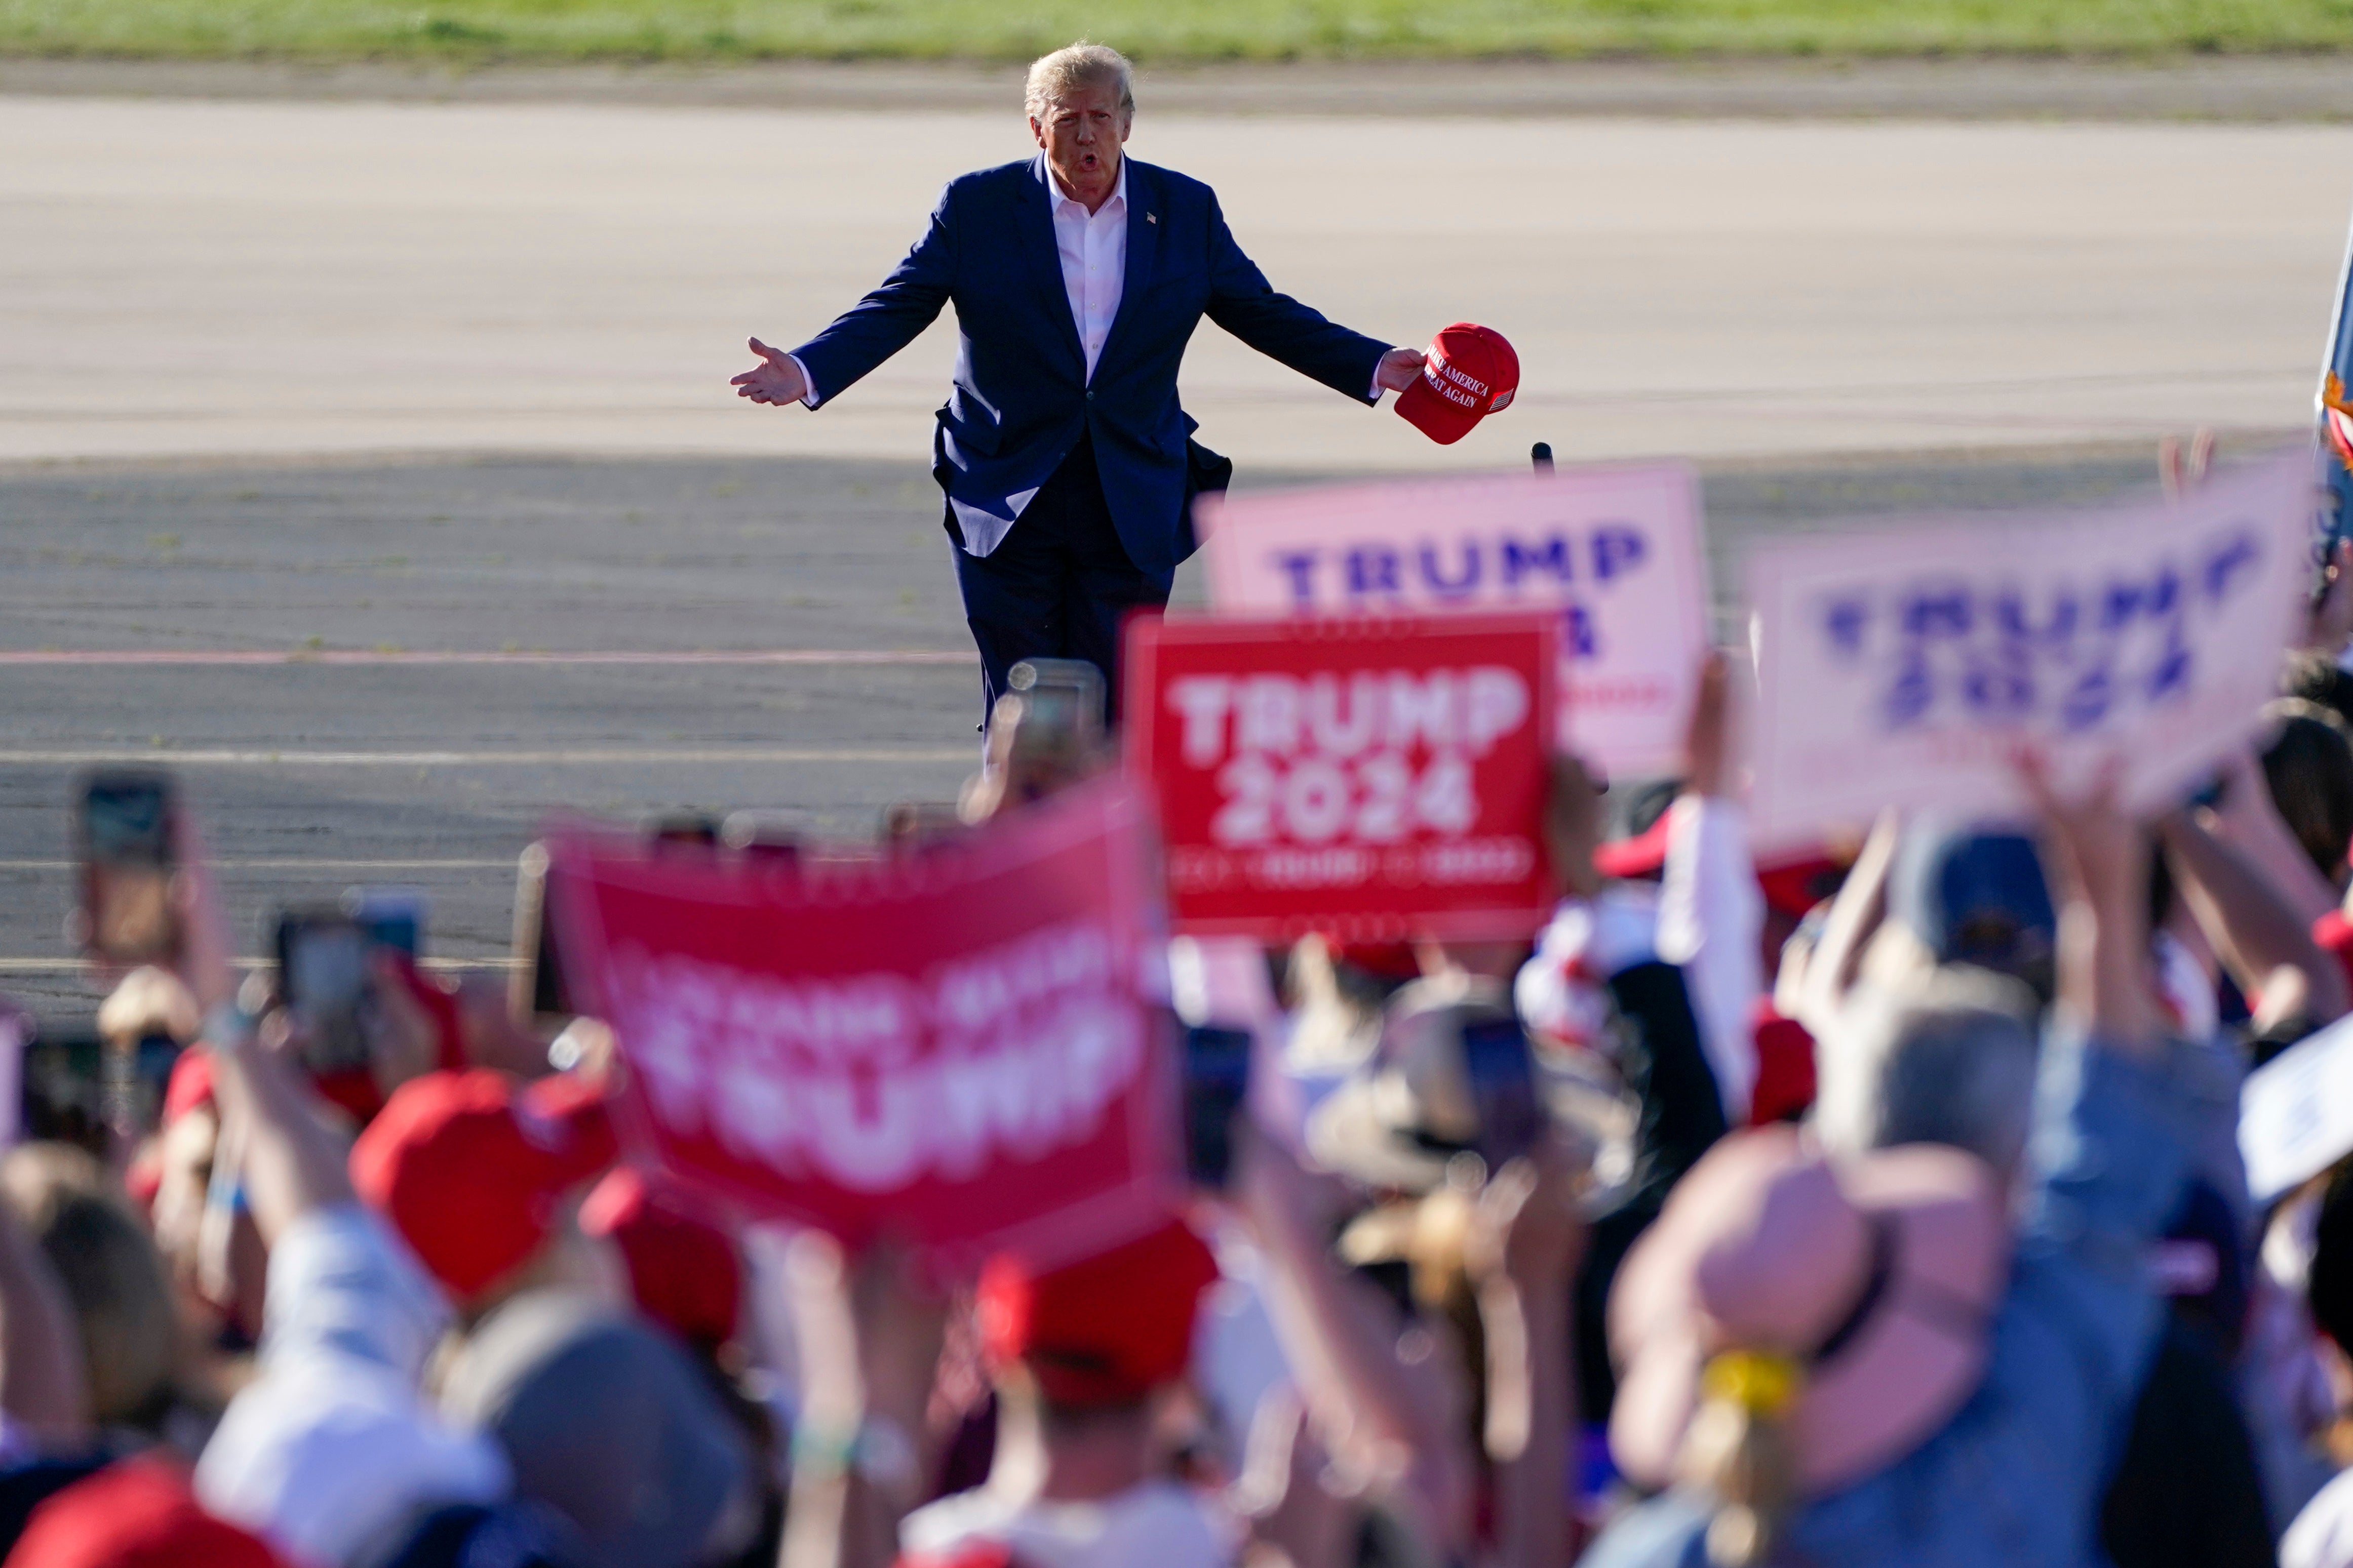 Former President Donald Trump walks across the tarmac as he arrives in Waco to speak at a campaign rally at Waco Regional Airport on March 25, 2023